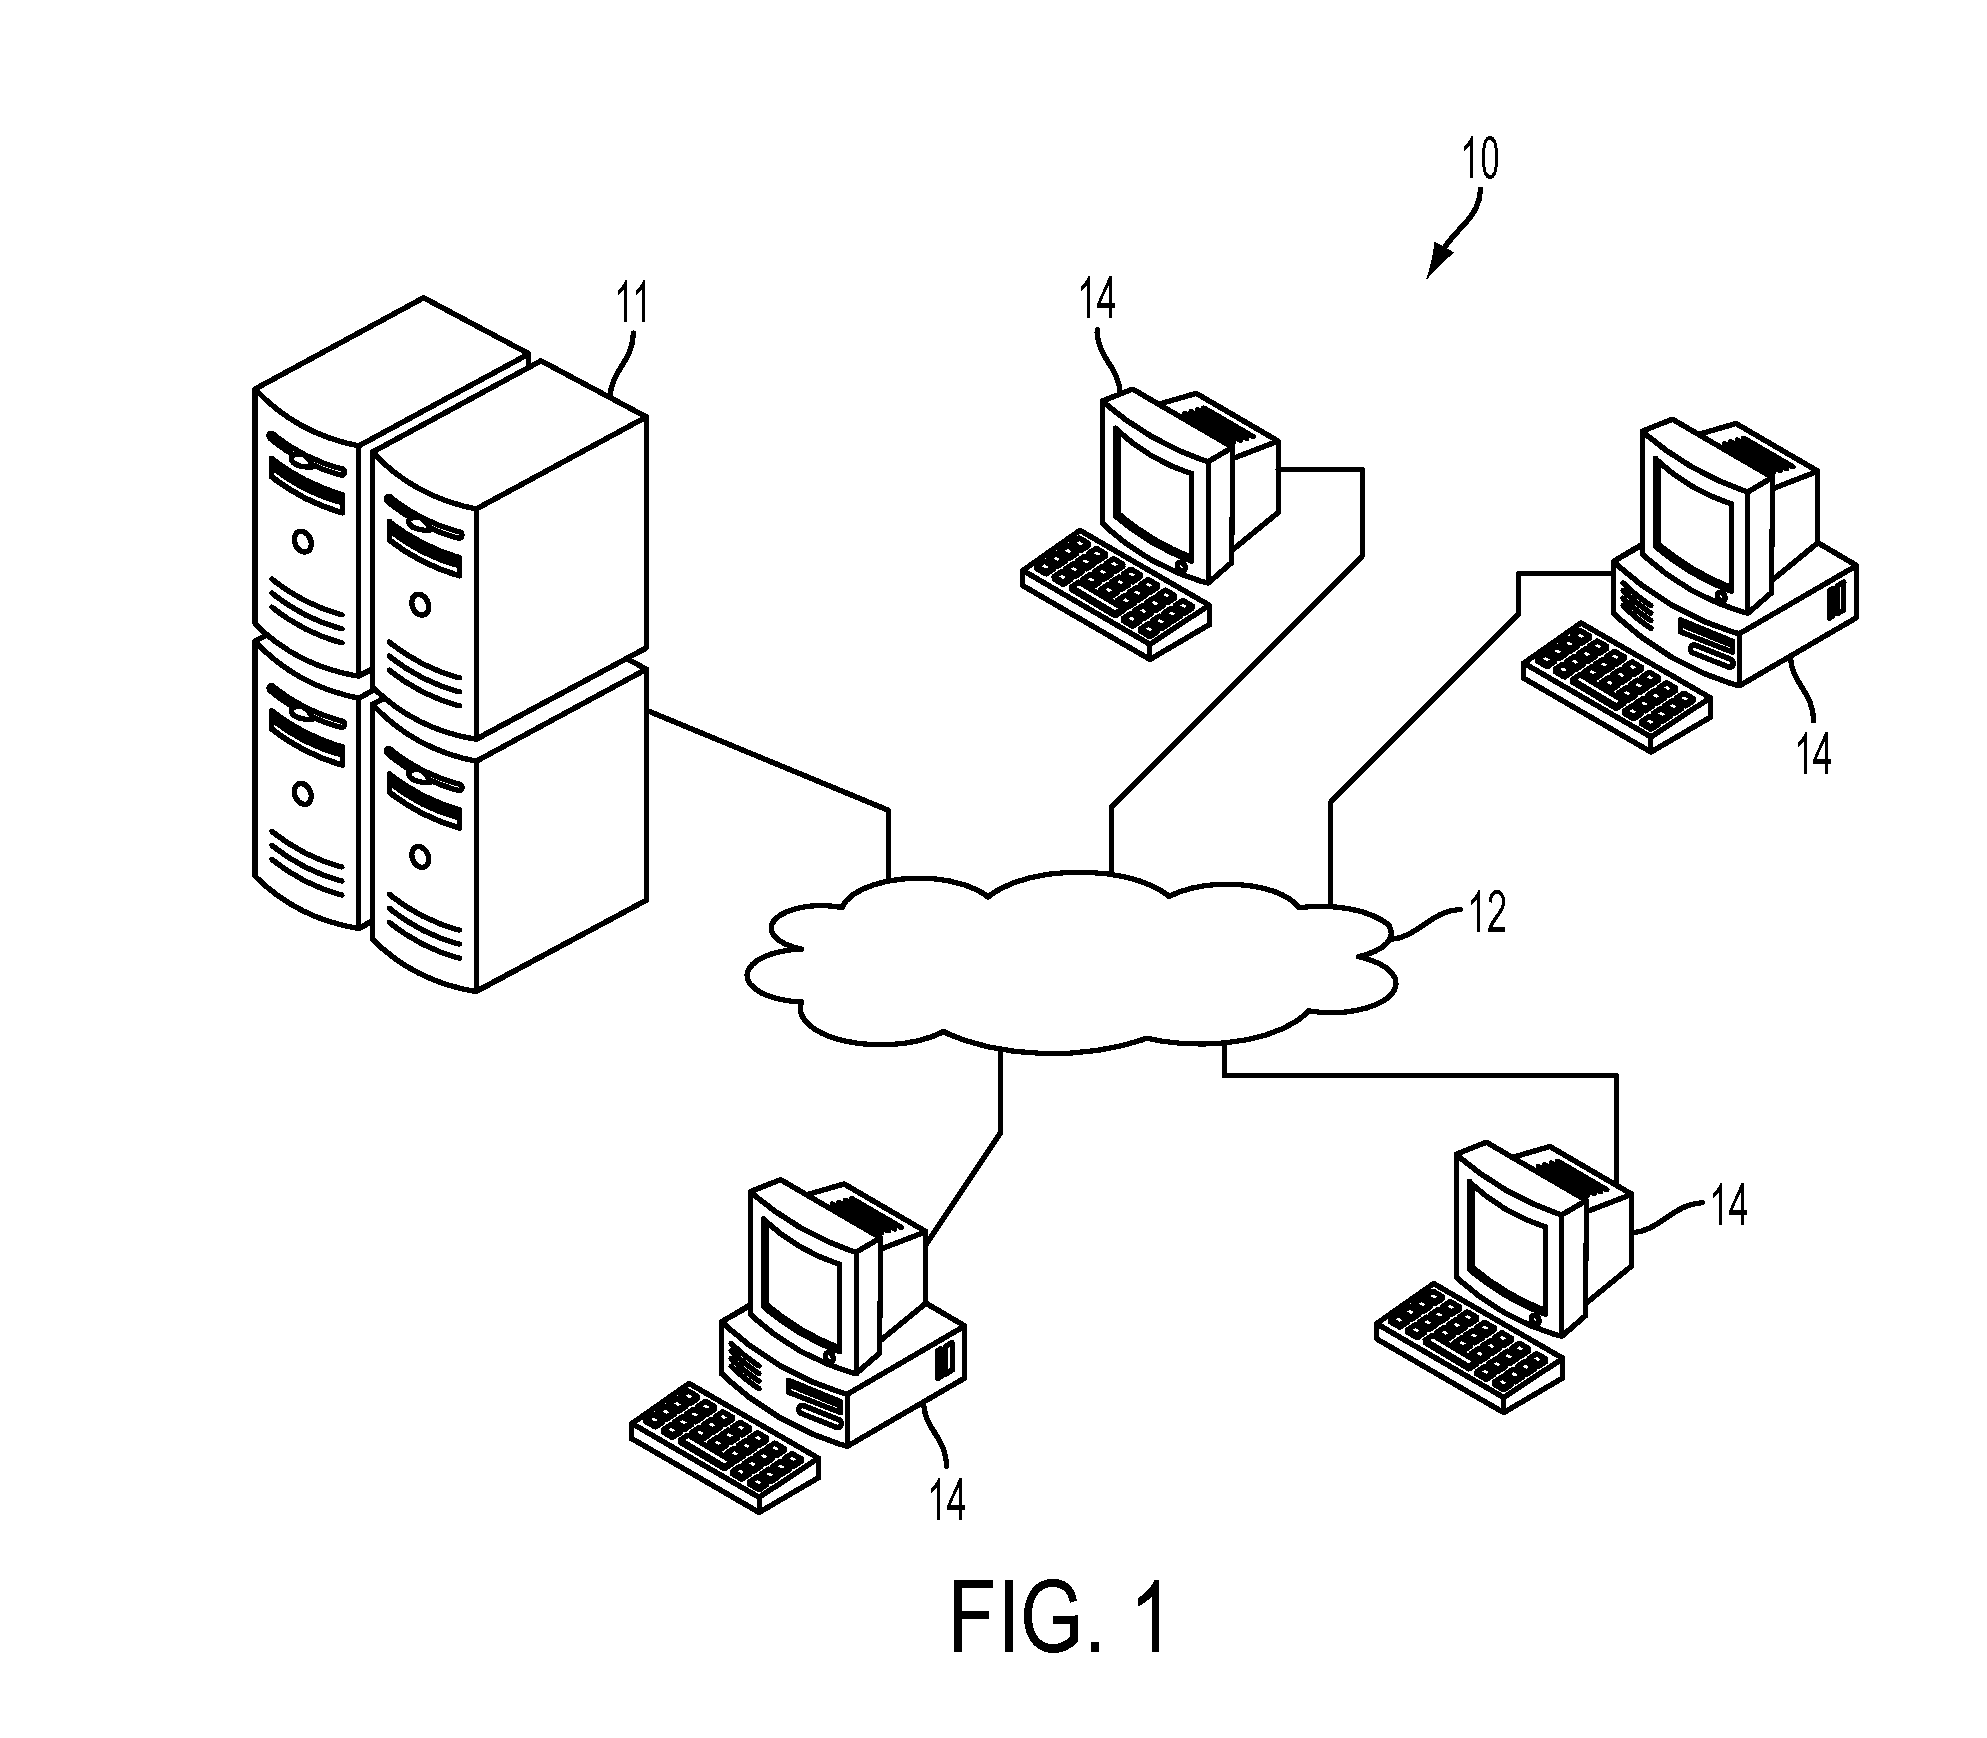 Method for diagnosis and documentation of healthcare information